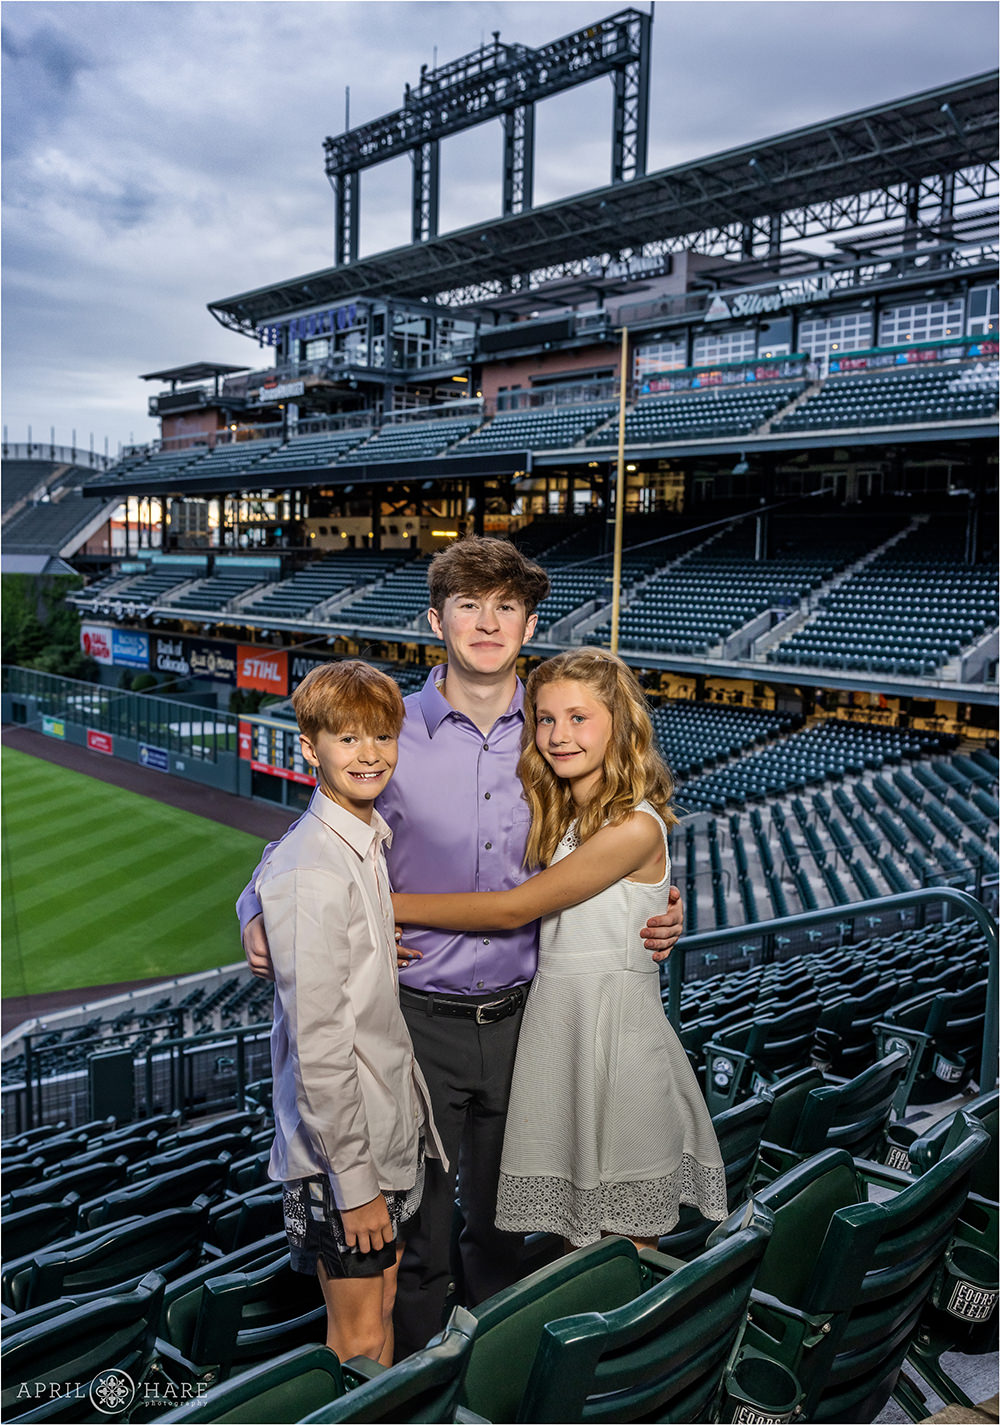 Siblings pose for a sweet photo together with the Coors Field stands in the backdrop at a bar mitzvah party in Denver